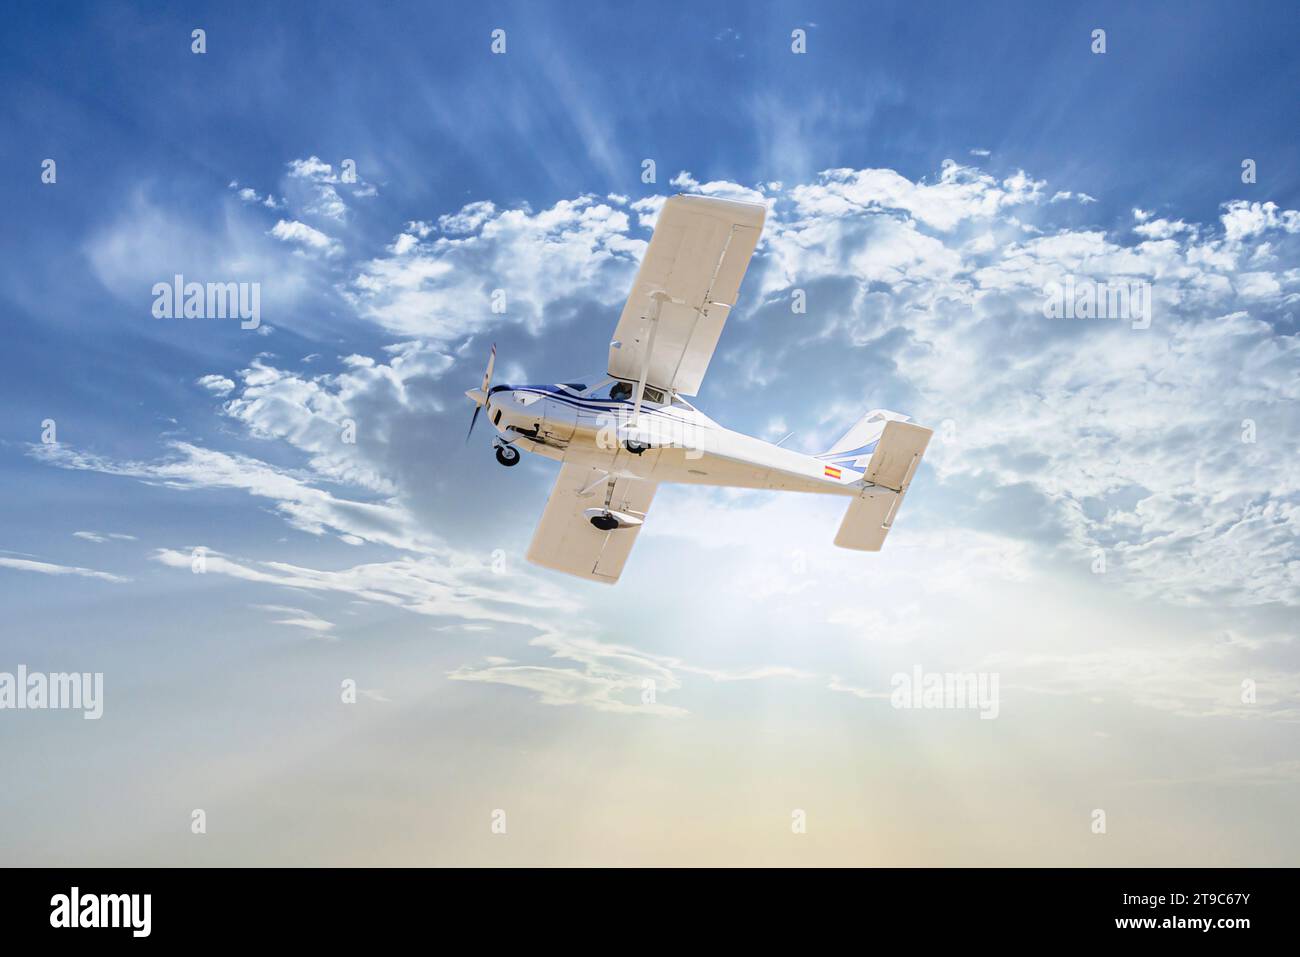 Single engine ultralight plane flying in the blue sky with white clouds Stock Photo